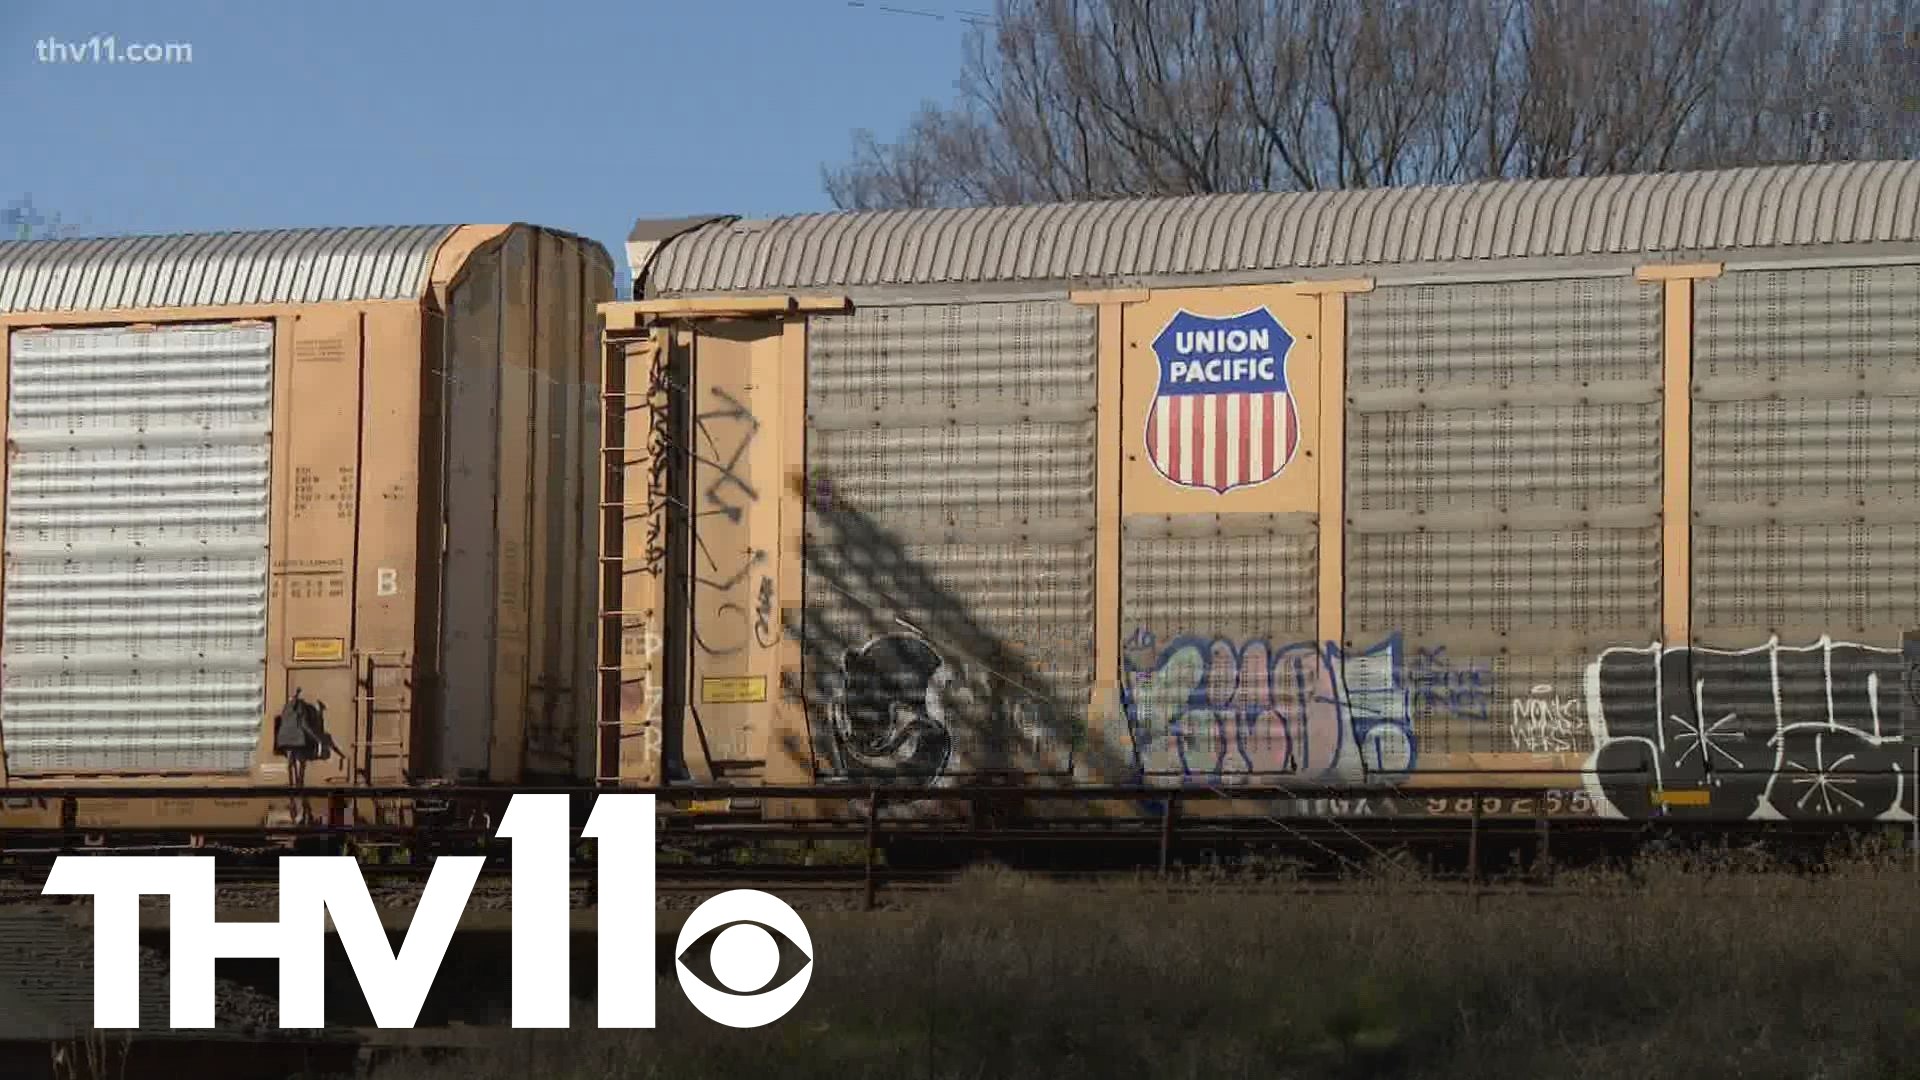 Arkansas could feel the impact of a railroad strike if an agreement isn't made before Dec. 9.